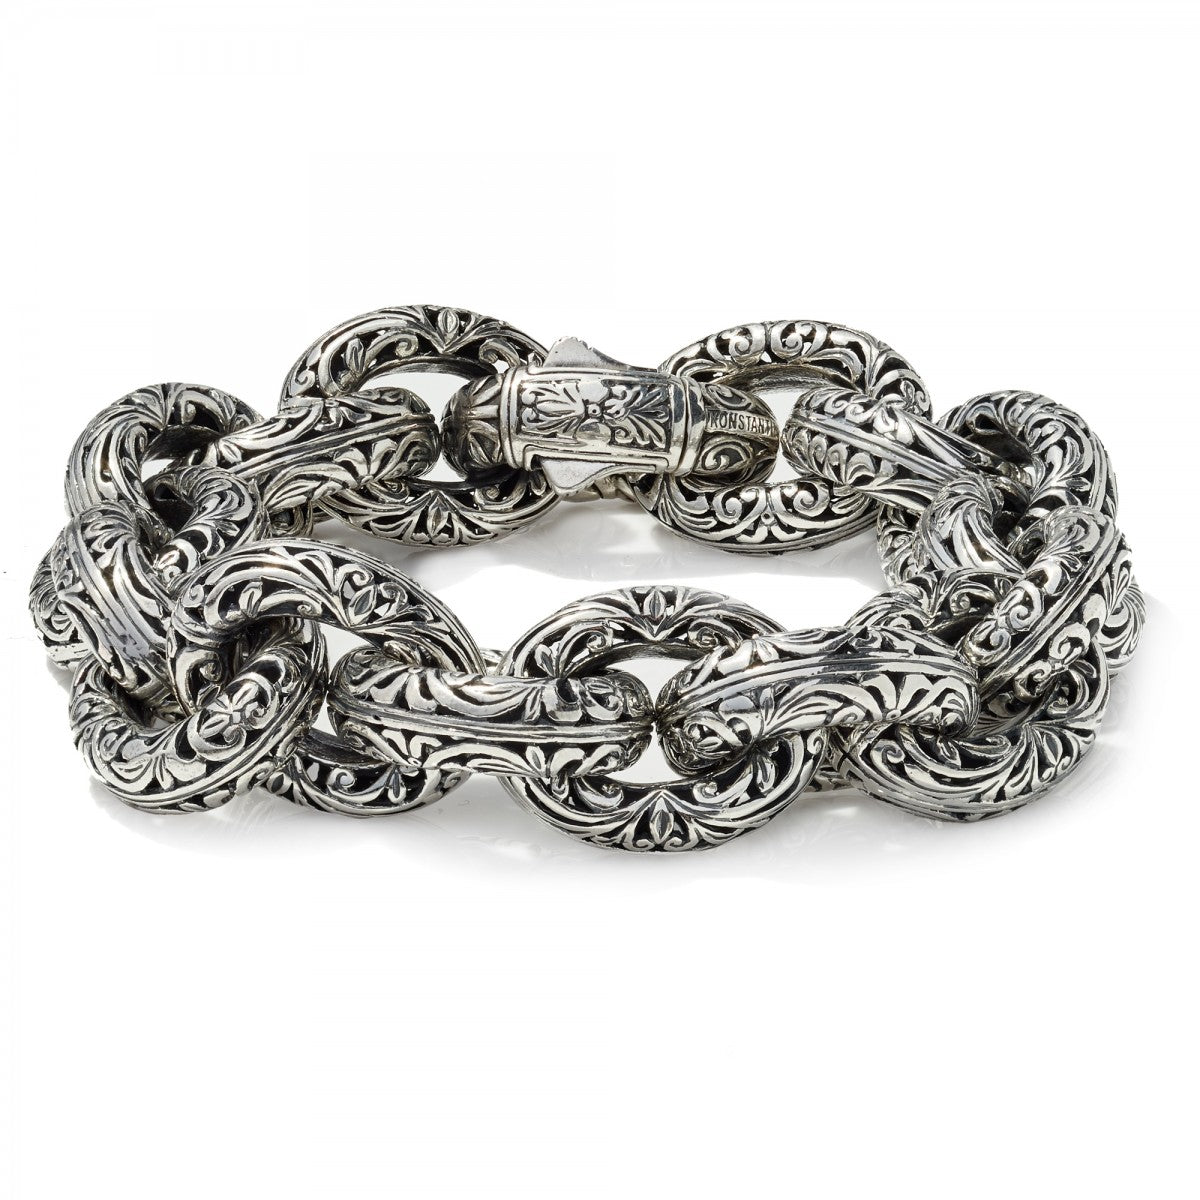 Konstantino Women's Sterling Silver Etched Link Bracelet, 7 Inches